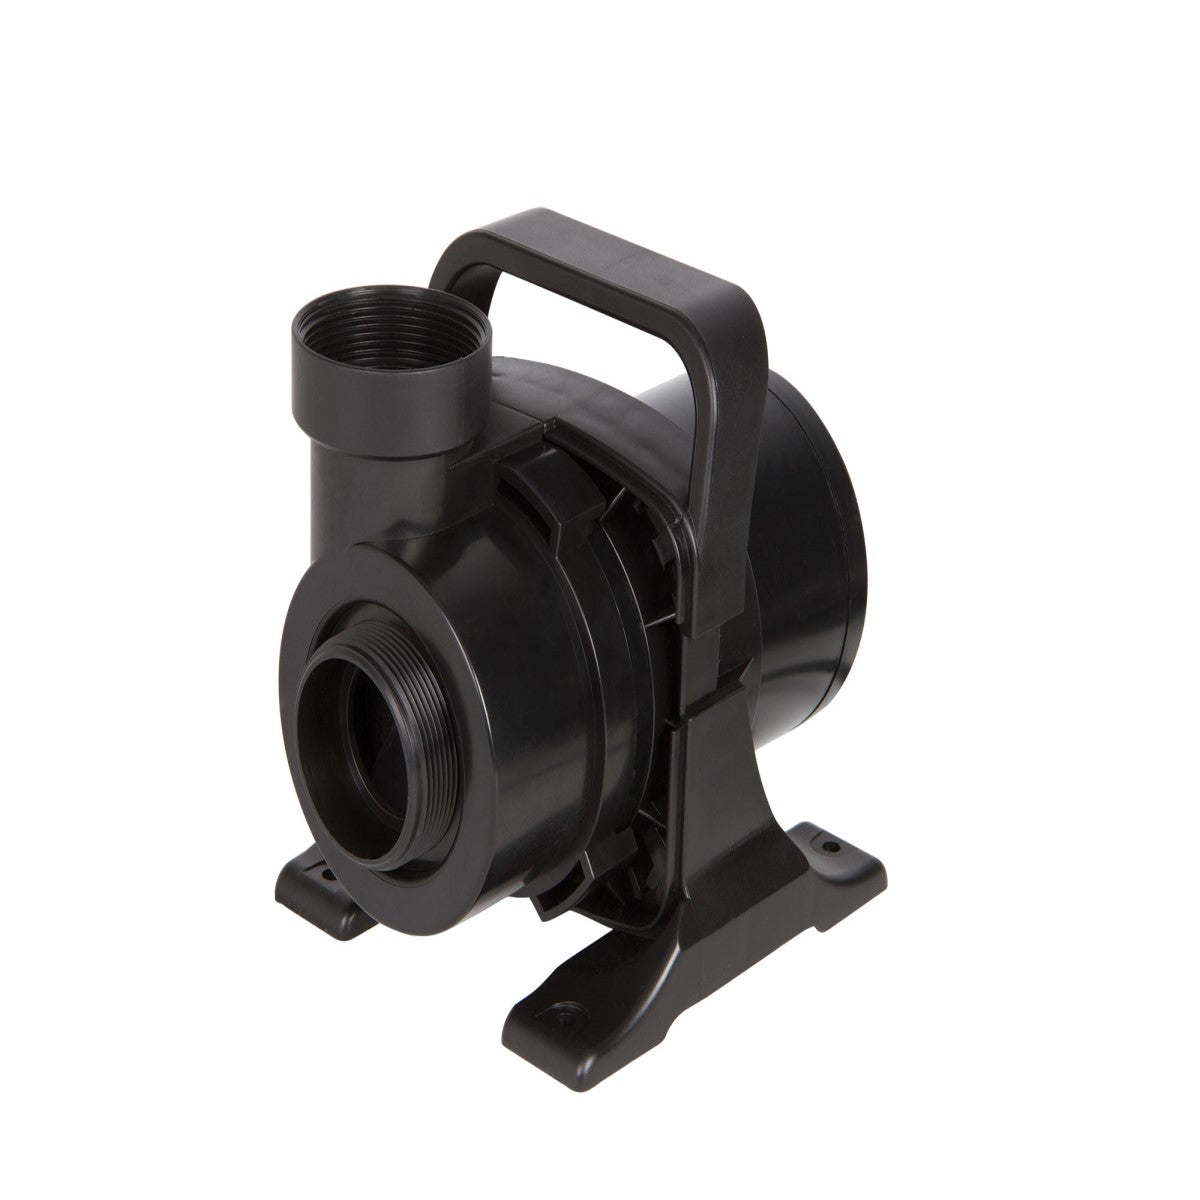 Atlantic MD Series magnetic Induction pumps provide years of service under the demanding conditions of smaller ponds, waterfalls and fountains 